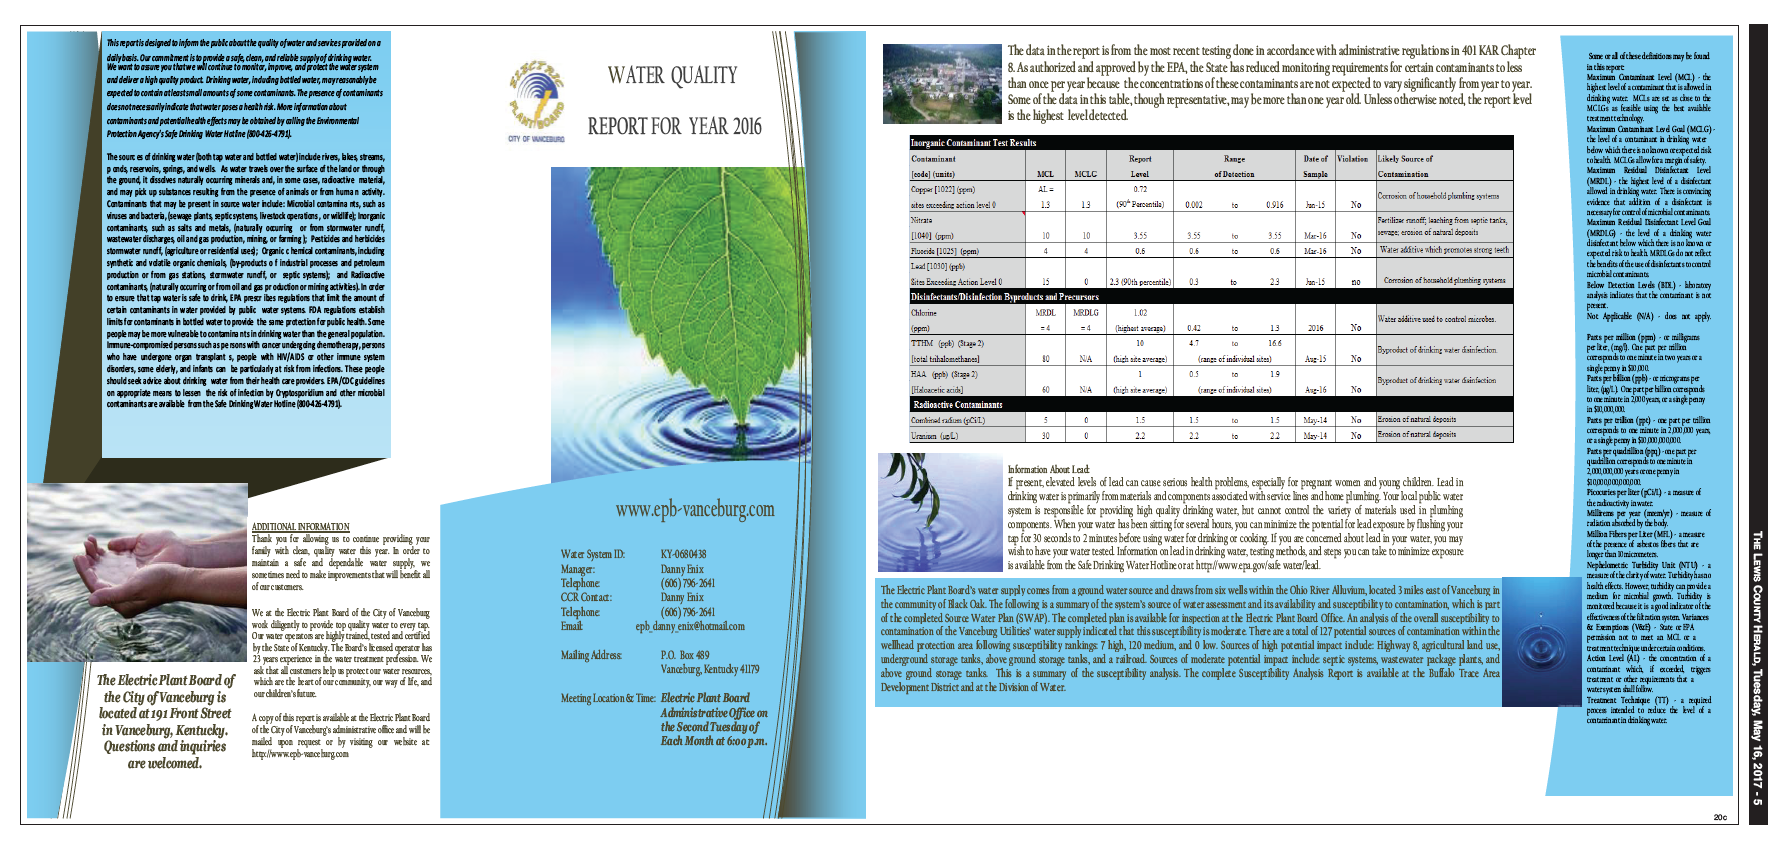 Electric Plant Board of the City of Vanceburg, 2016 Water Quality Report